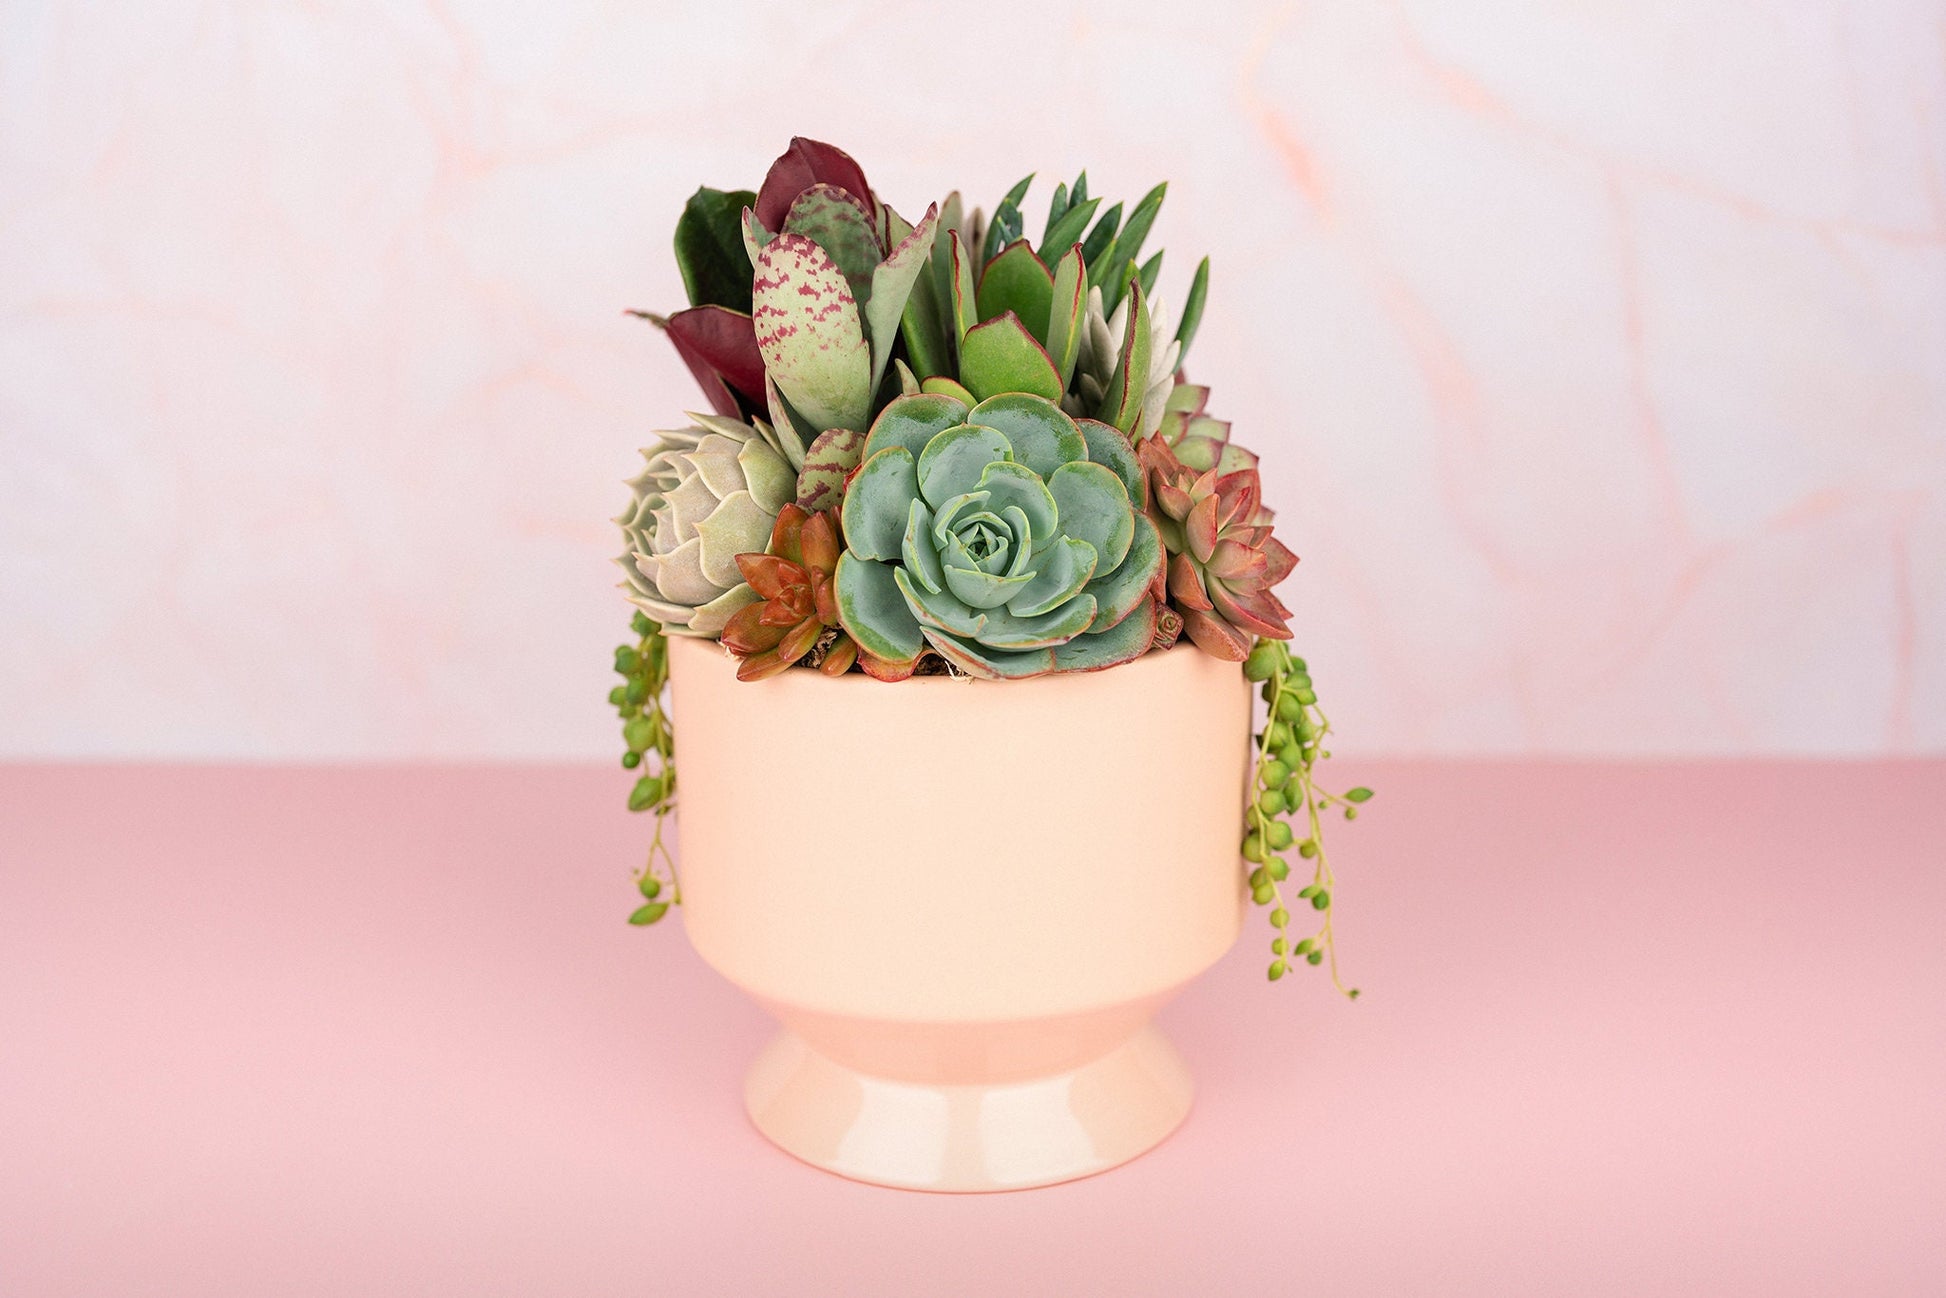 Peach (Pink/Blush) Footed Succulent Arrangement Planter: Living Succulent Gift, Centerpiece for Weddings and events, Housewarming Gift